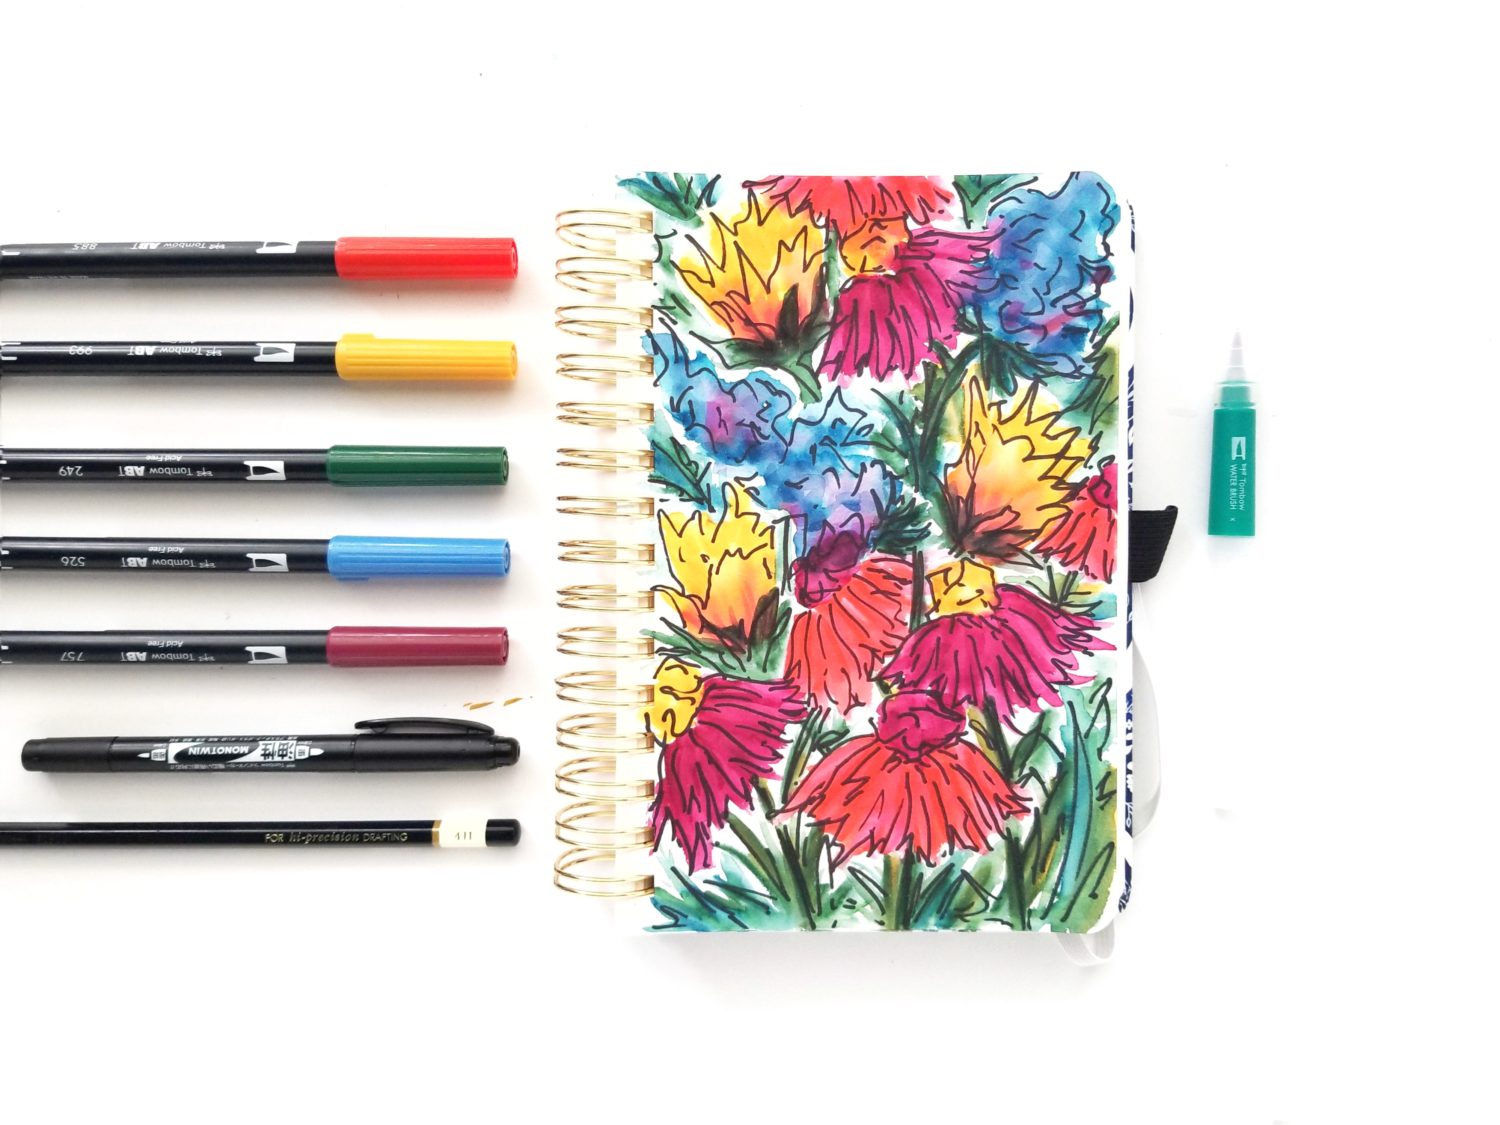 Using Tombow Dual Brush Pens for Watercoloring - Tombow USA Blog